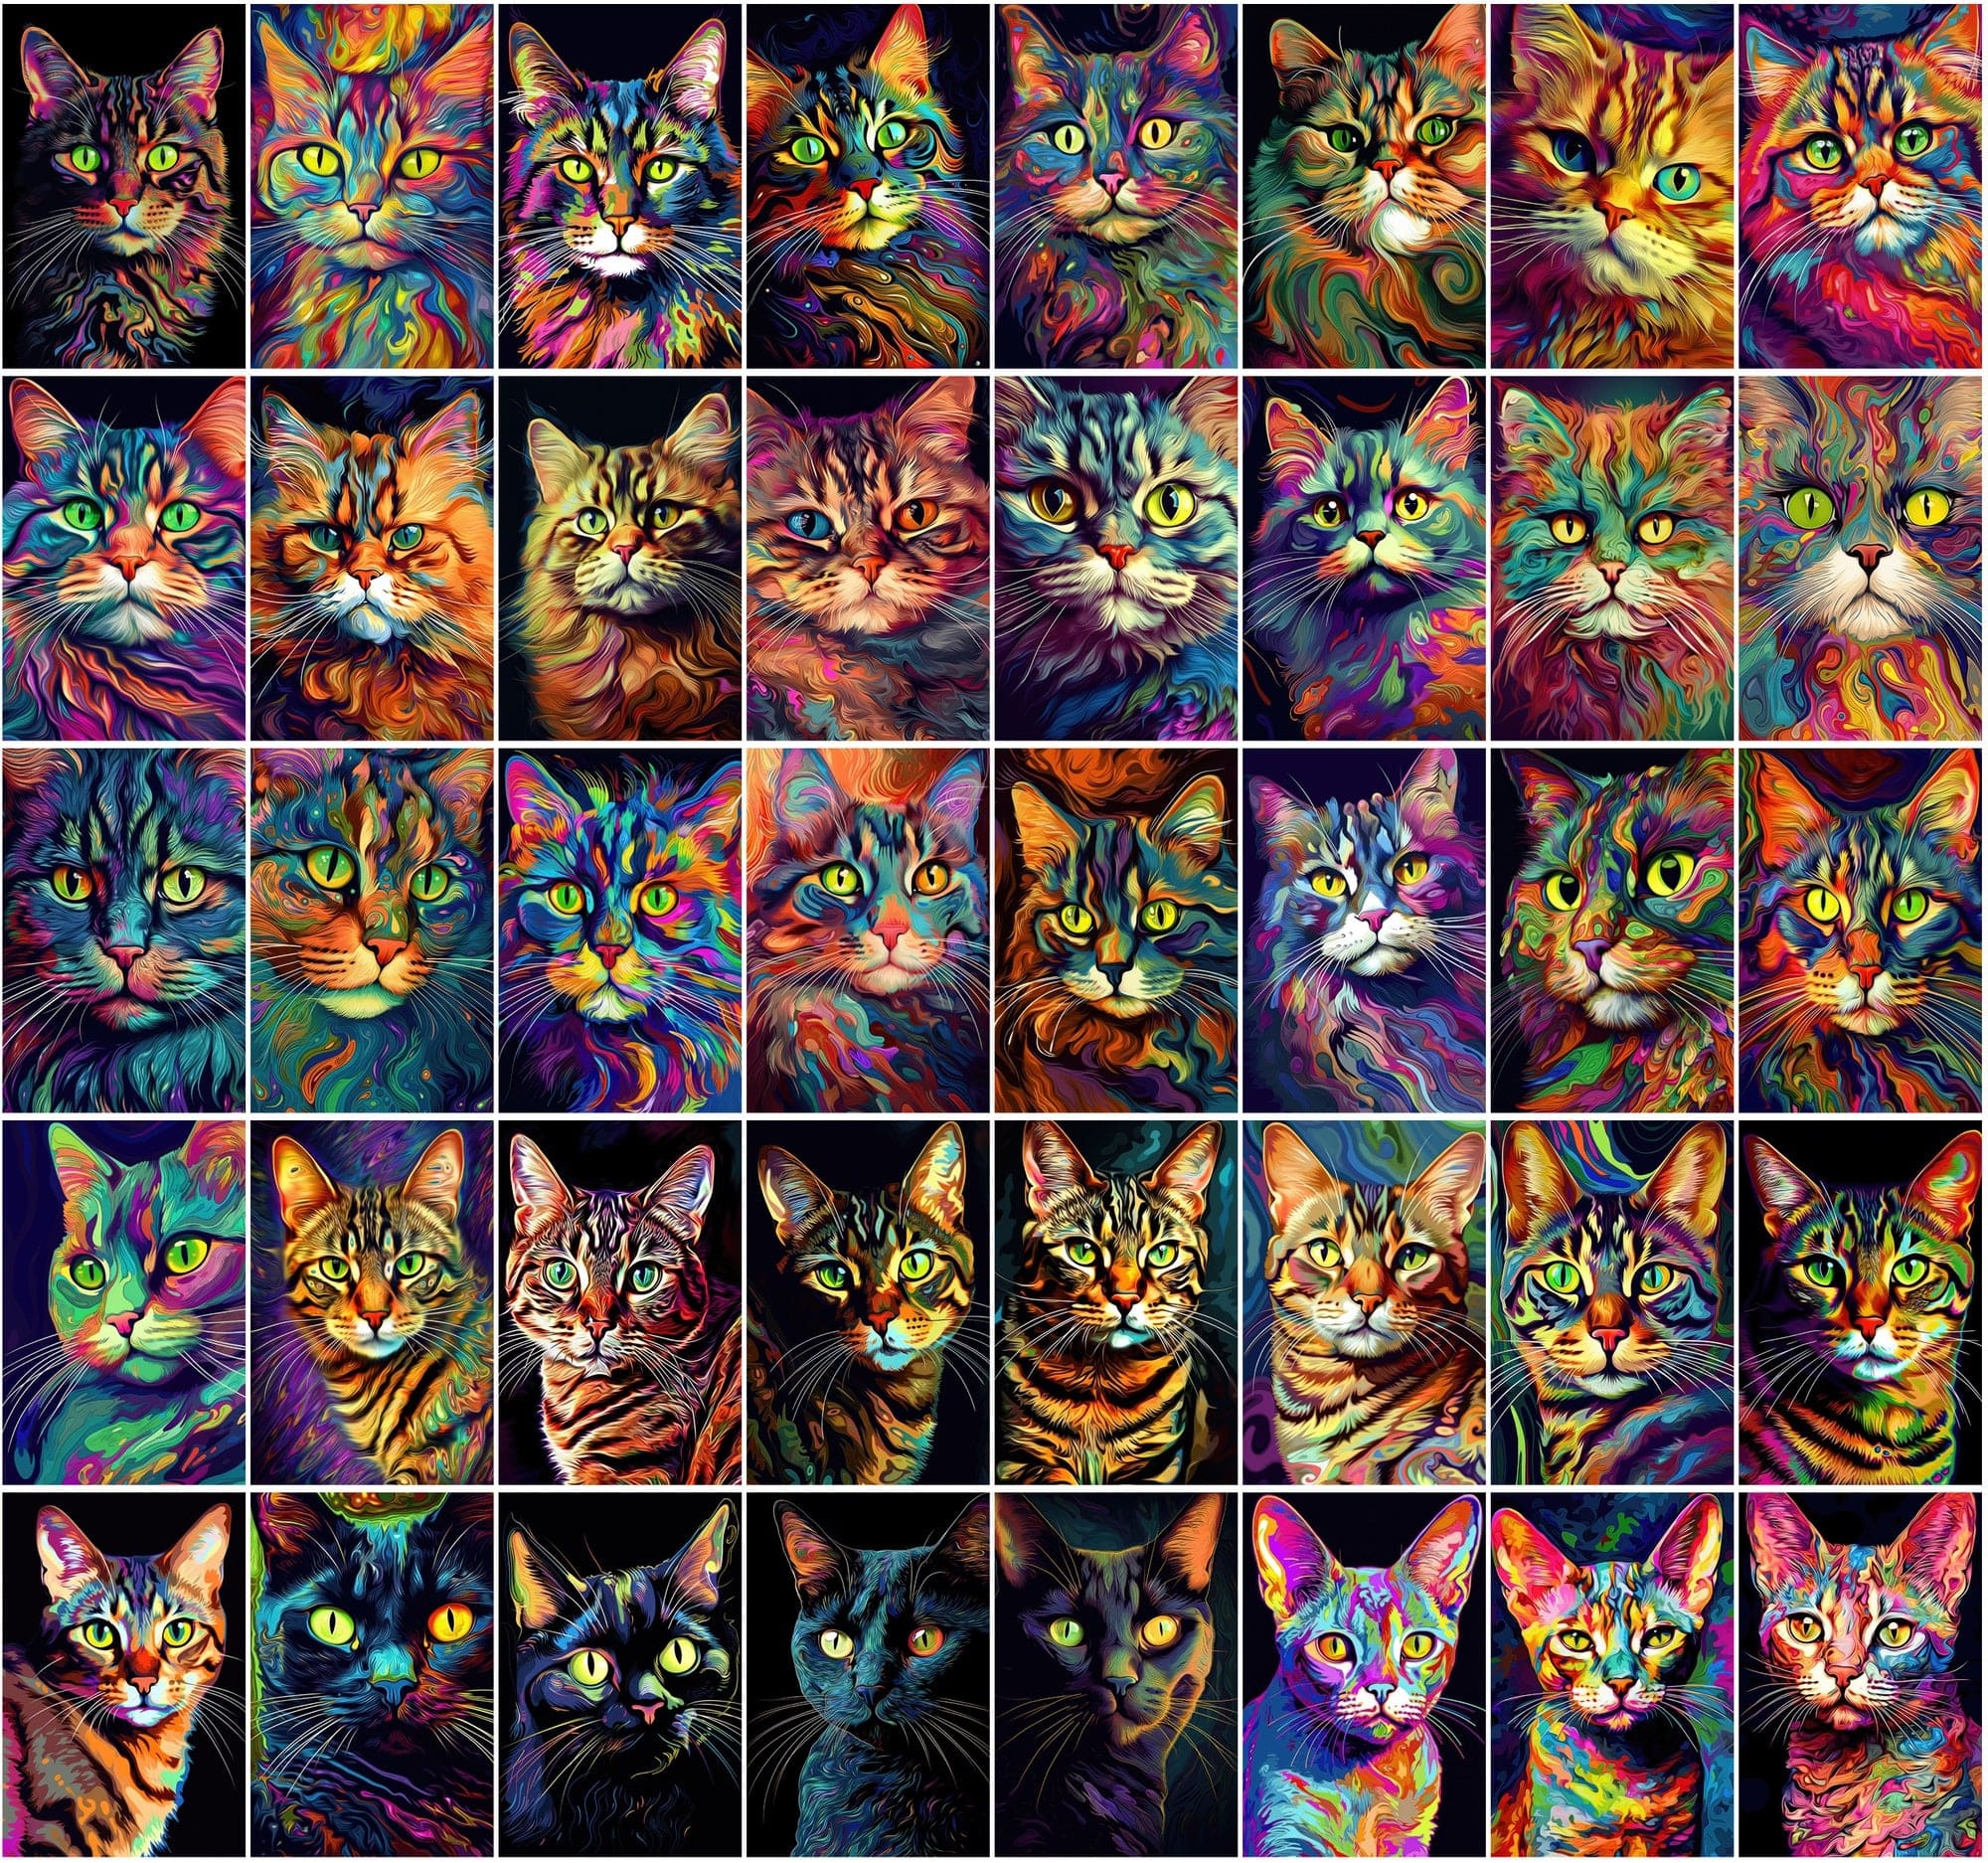 Psychedelic Cat Breed Images - 830 High-Resolution PNGs with Commercial License Digital Download Sumobundle